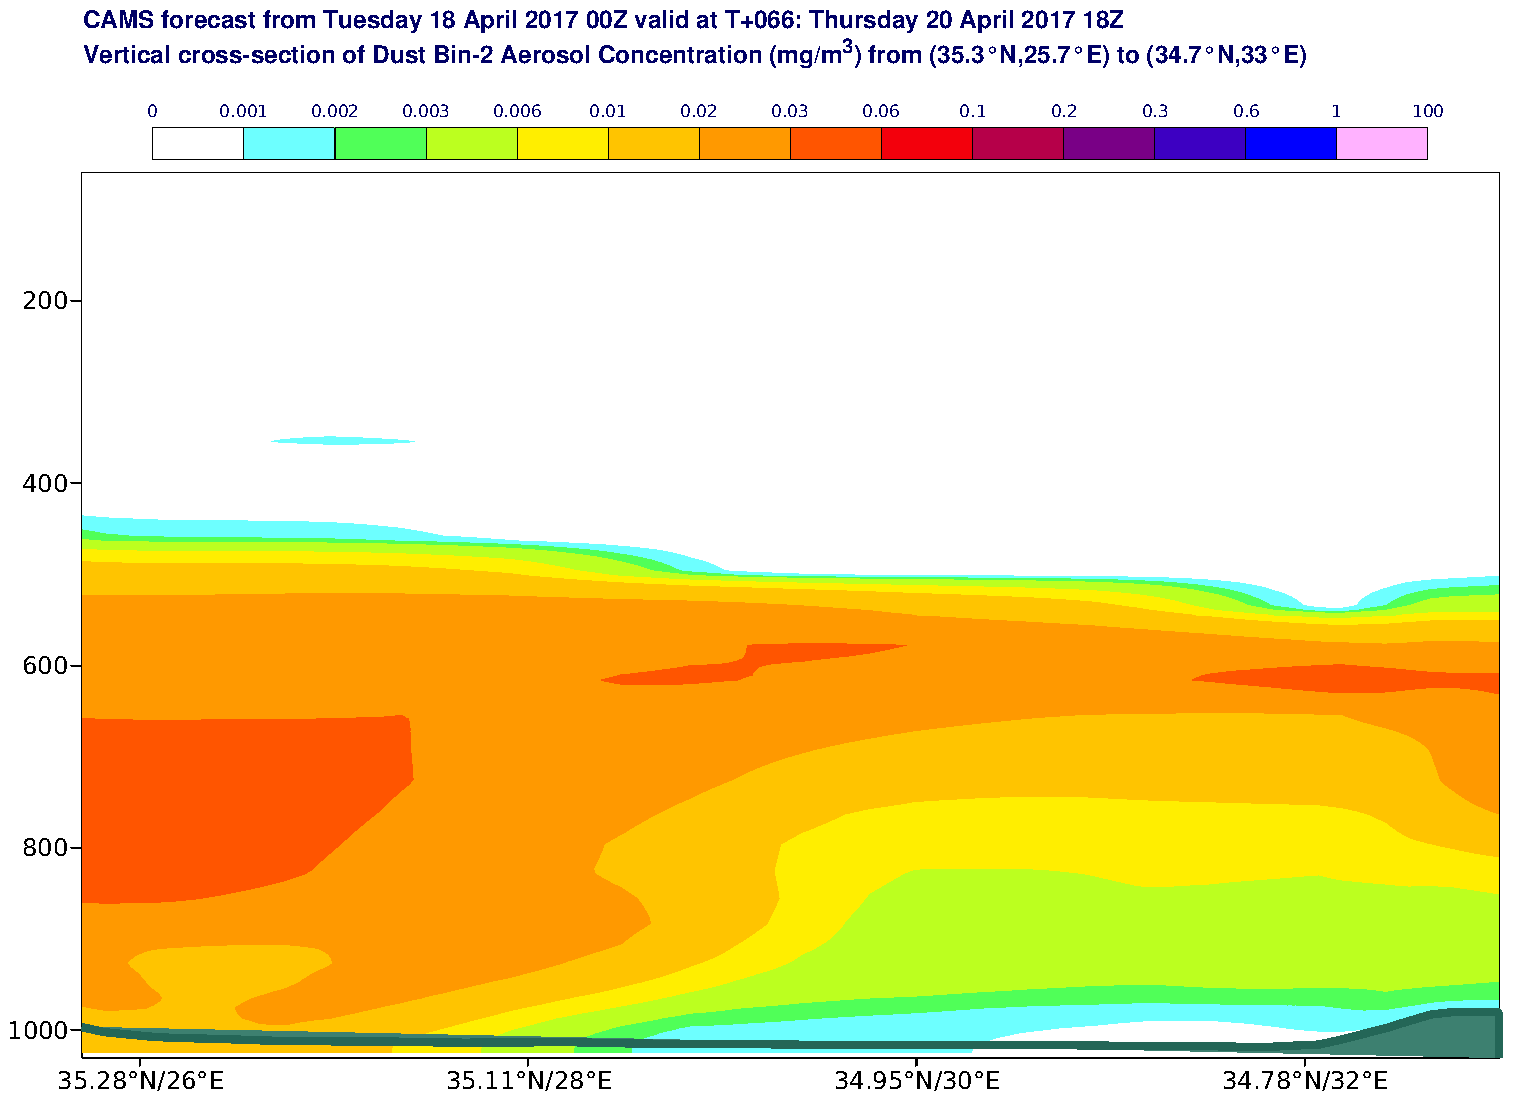 Vertical cross-section of Dust Bin-2 Aerosol Concentration (mg/m3) valid at T66 - 2017-04-20 18:00